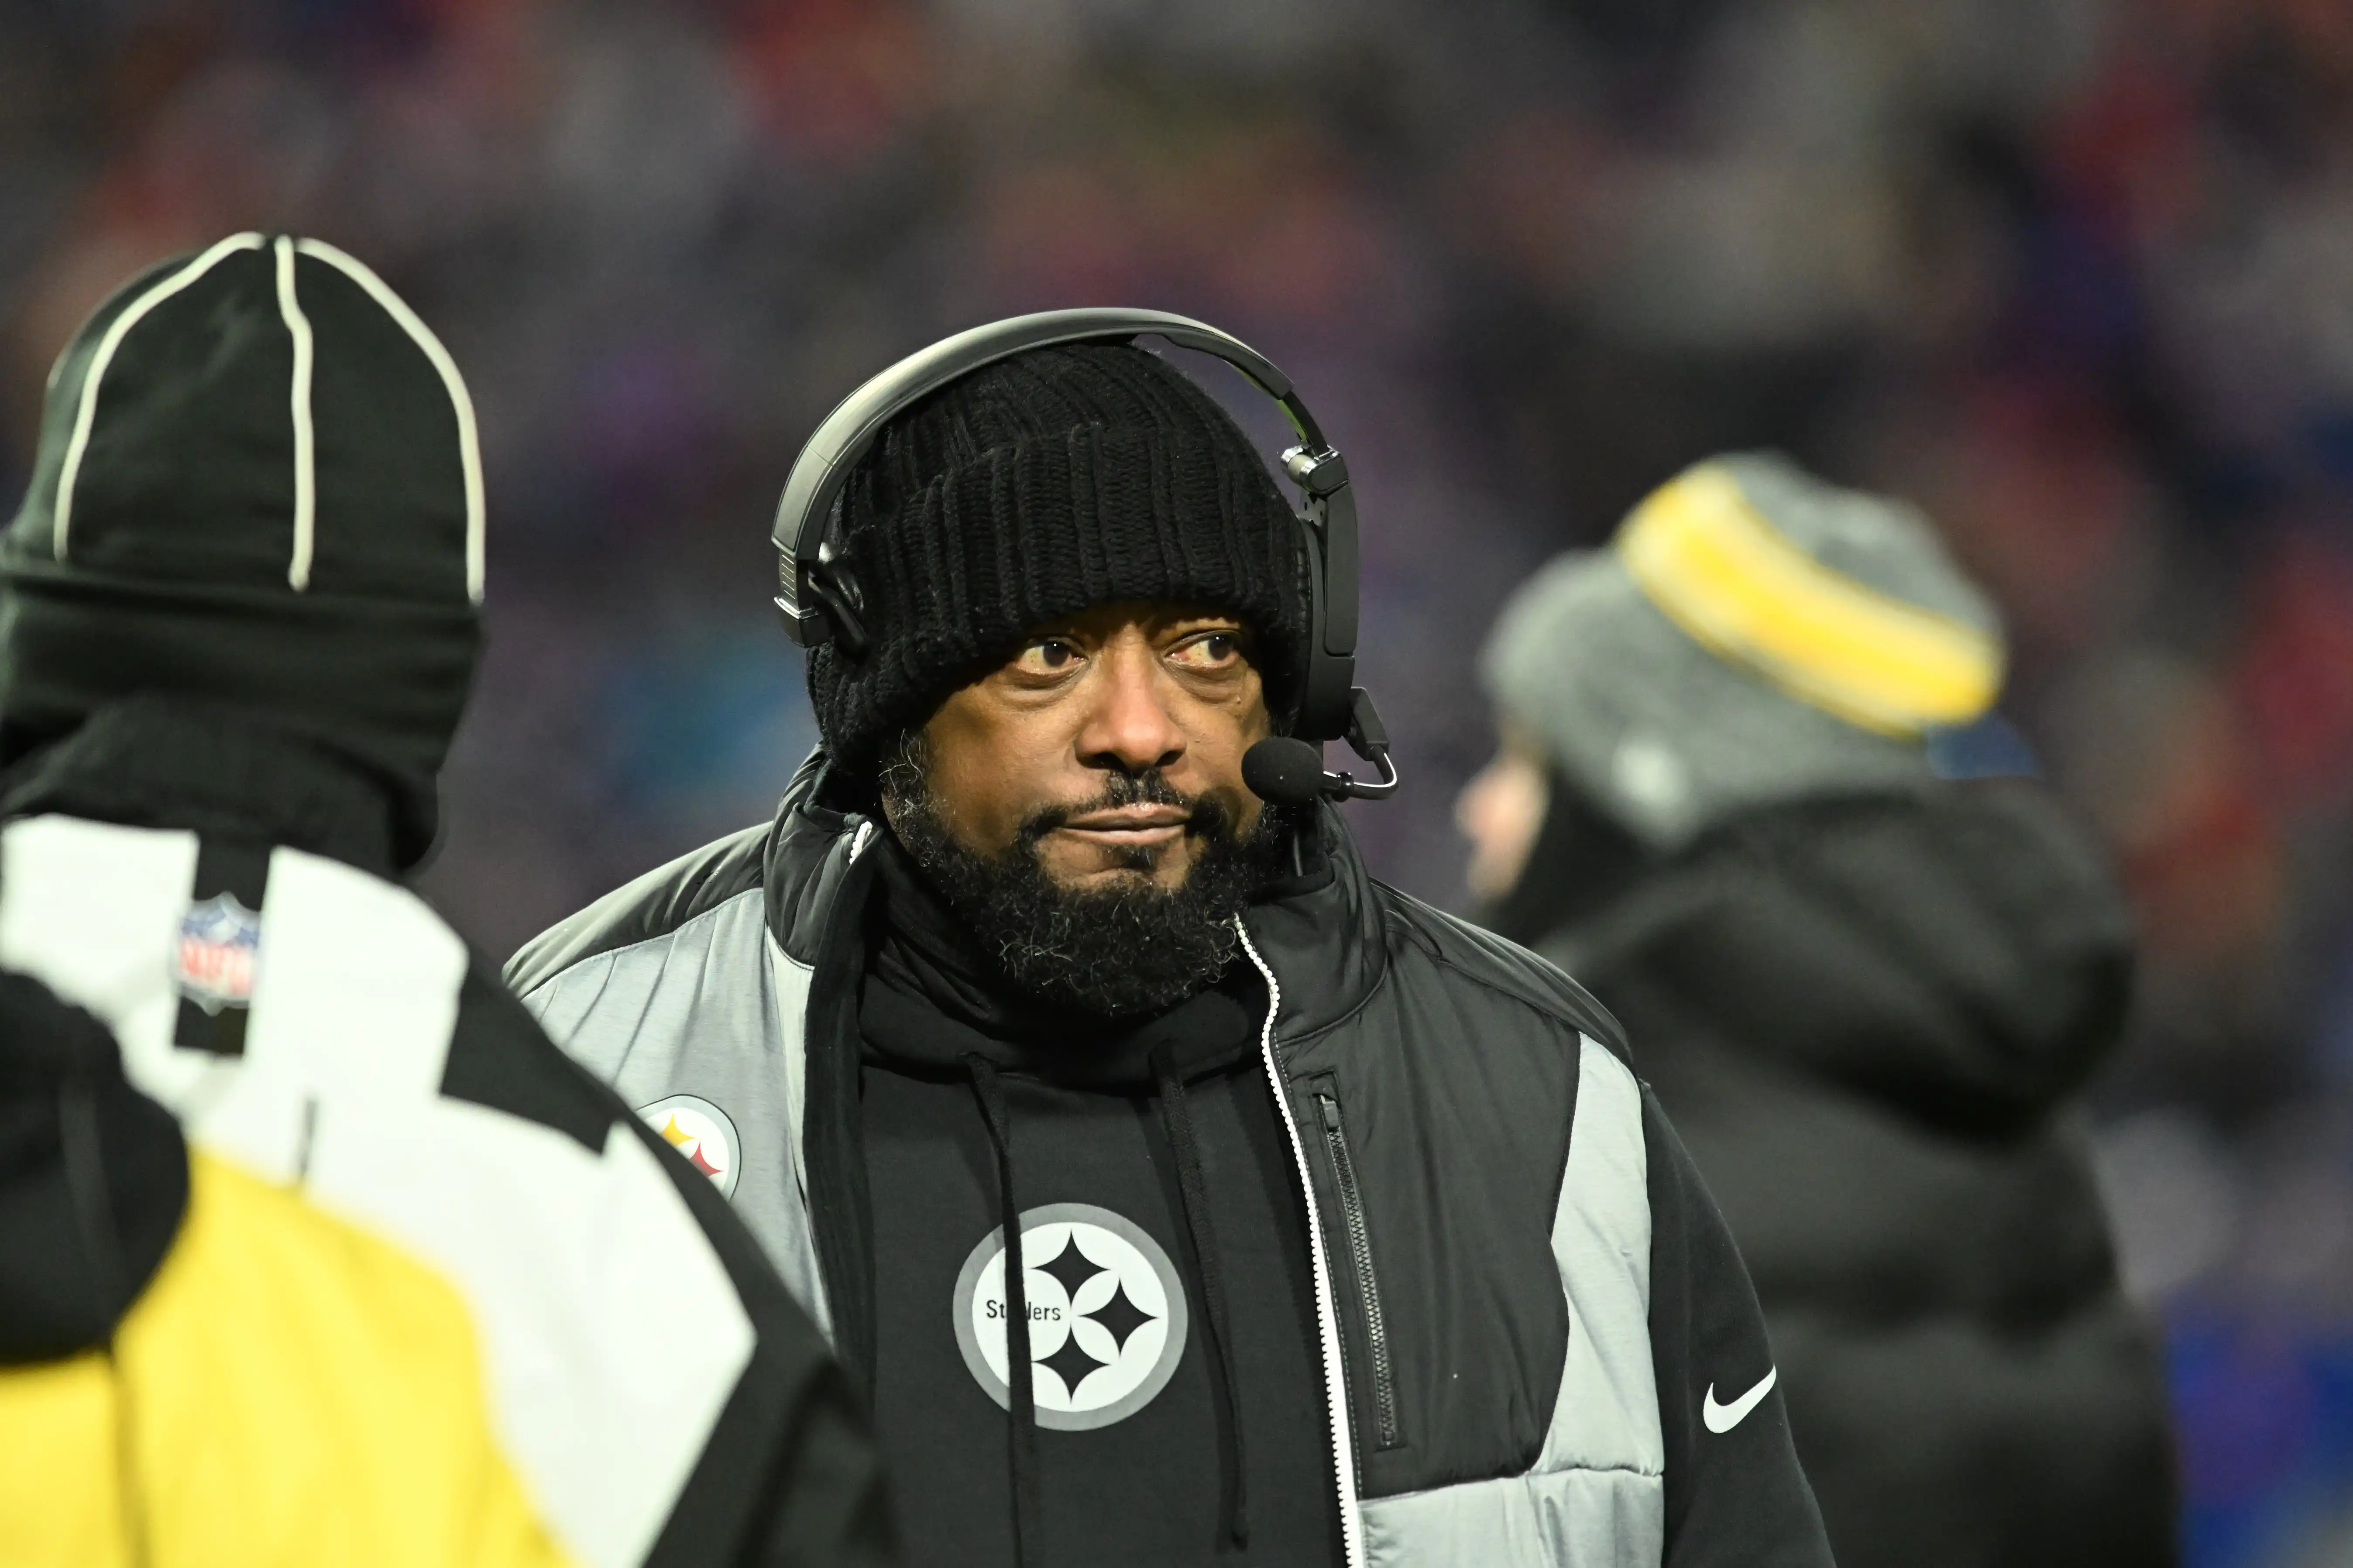 Pittsburgh Steelers coach Mike Tomlin abruptly walks out of postgame press conference in silence